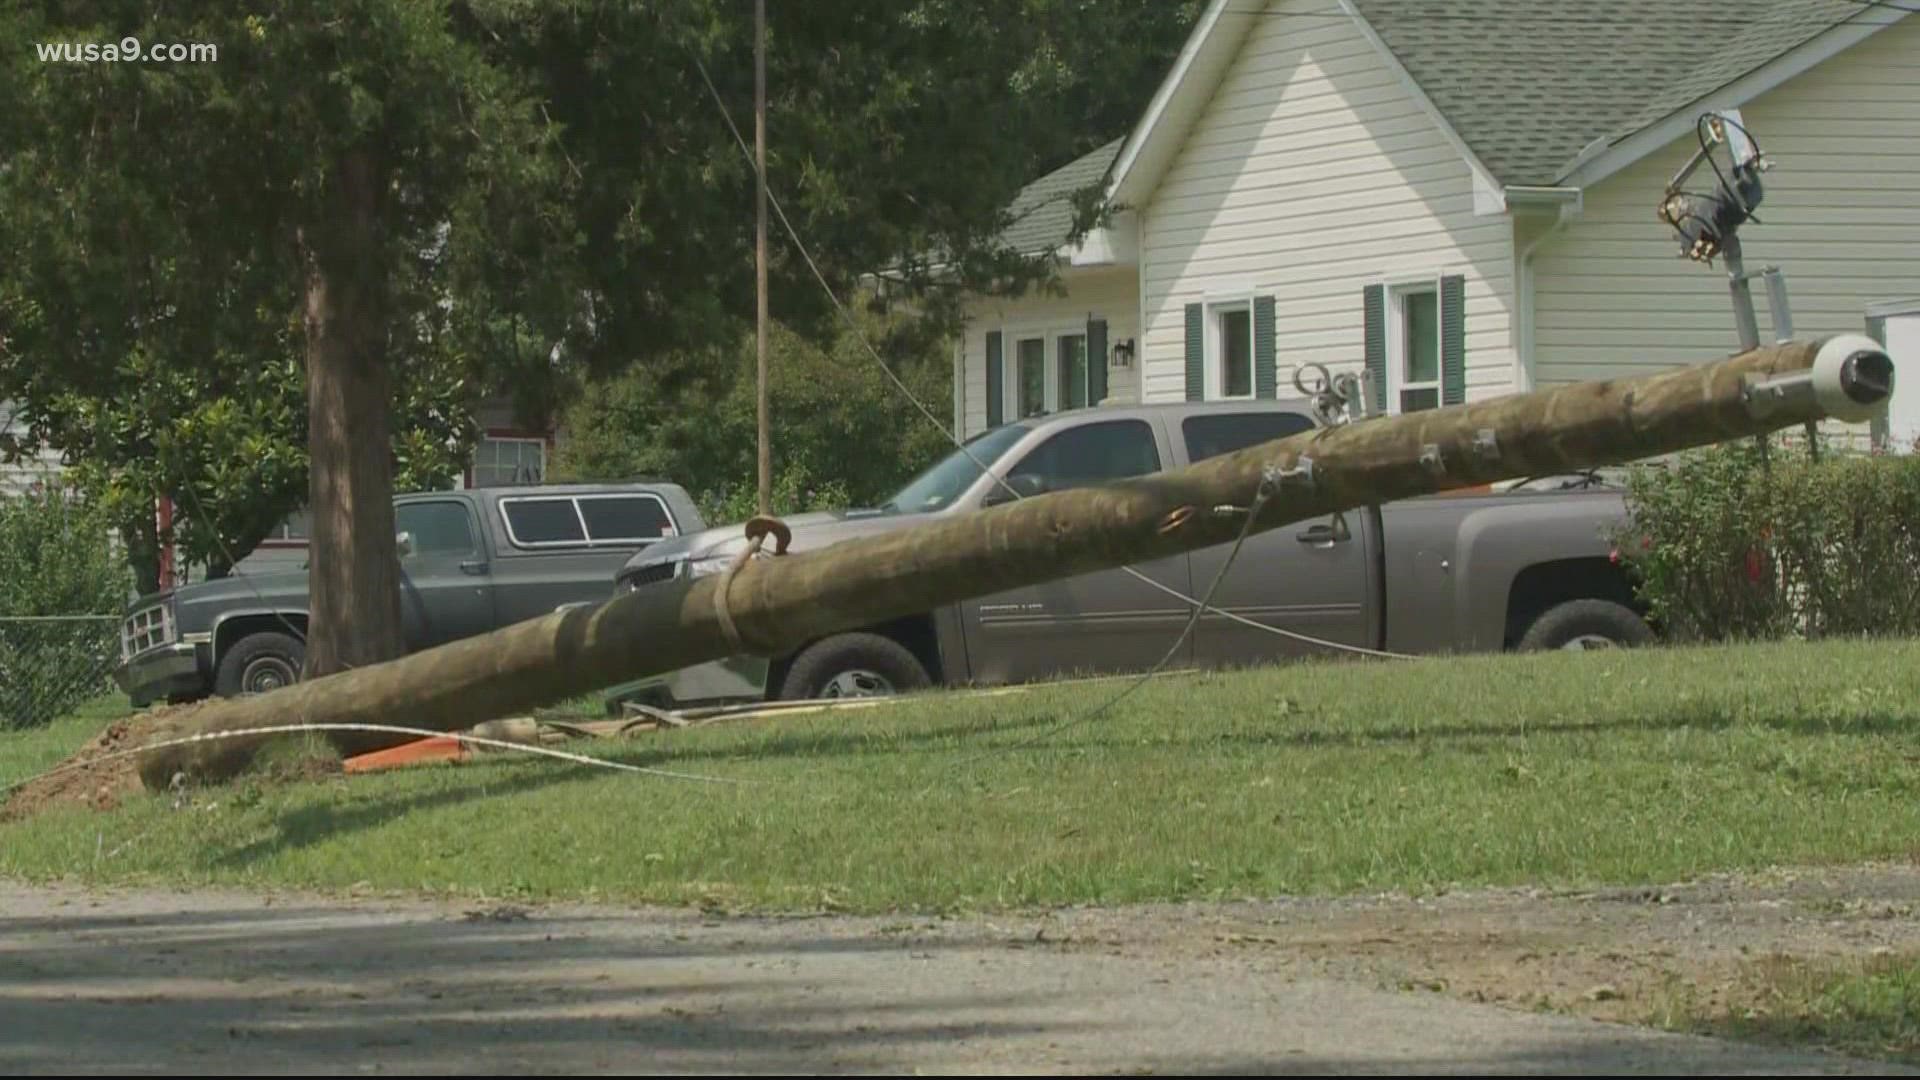 A storm cell blew through Falmouth, VA Thursday evening, knocking down trees and power lines.